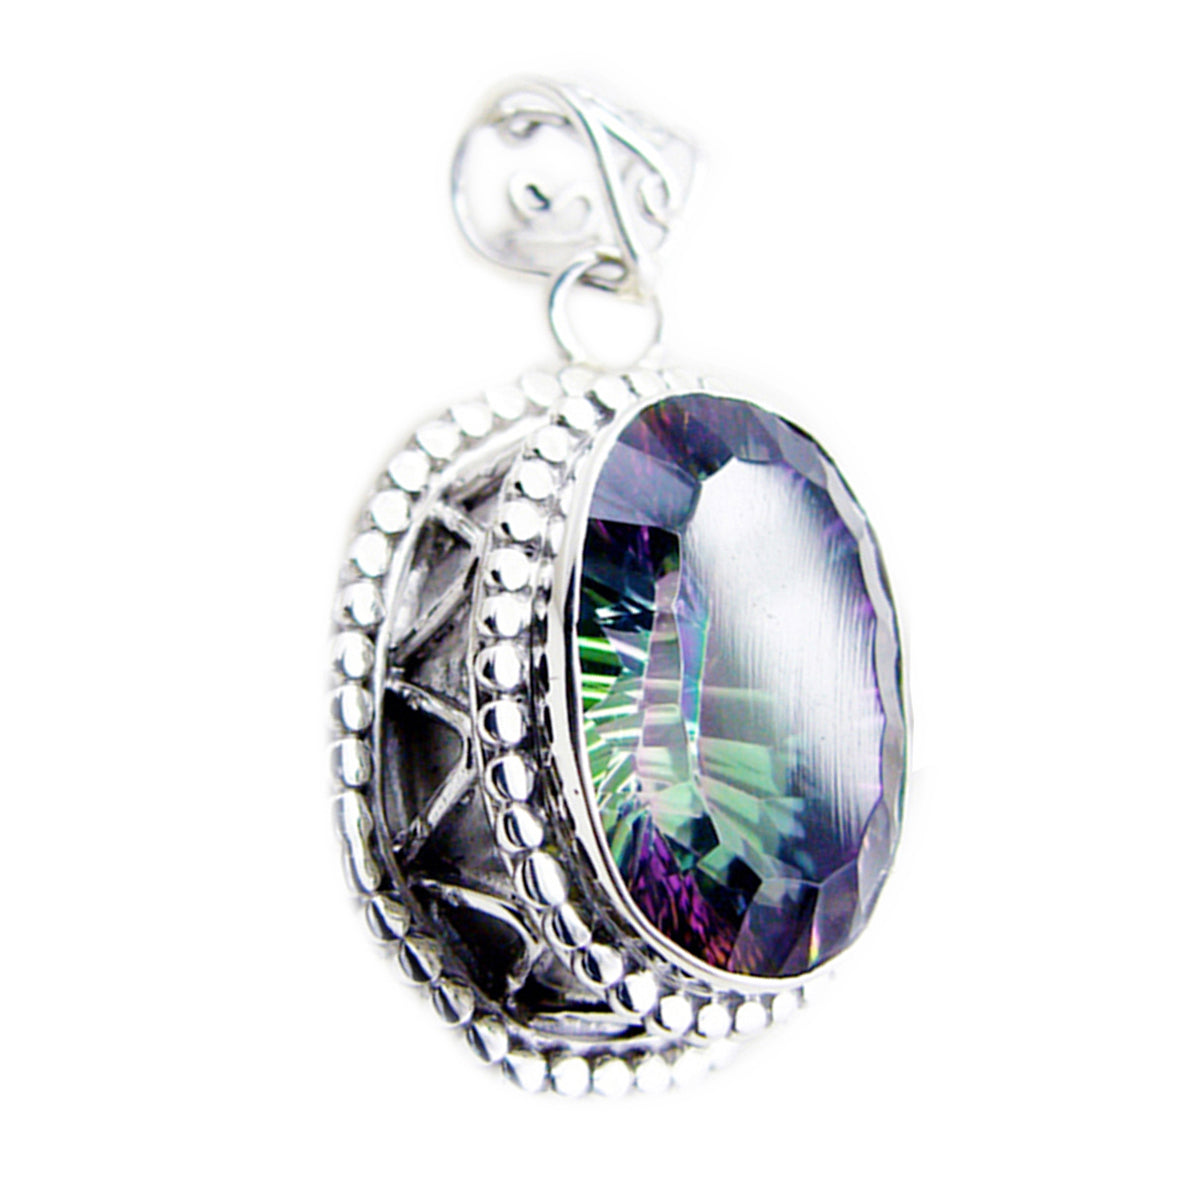 Riyo Stunning Gemstone Oval Faceted Multi Color Mystic Quartz Sterling Silver Pendant Gift For Friend